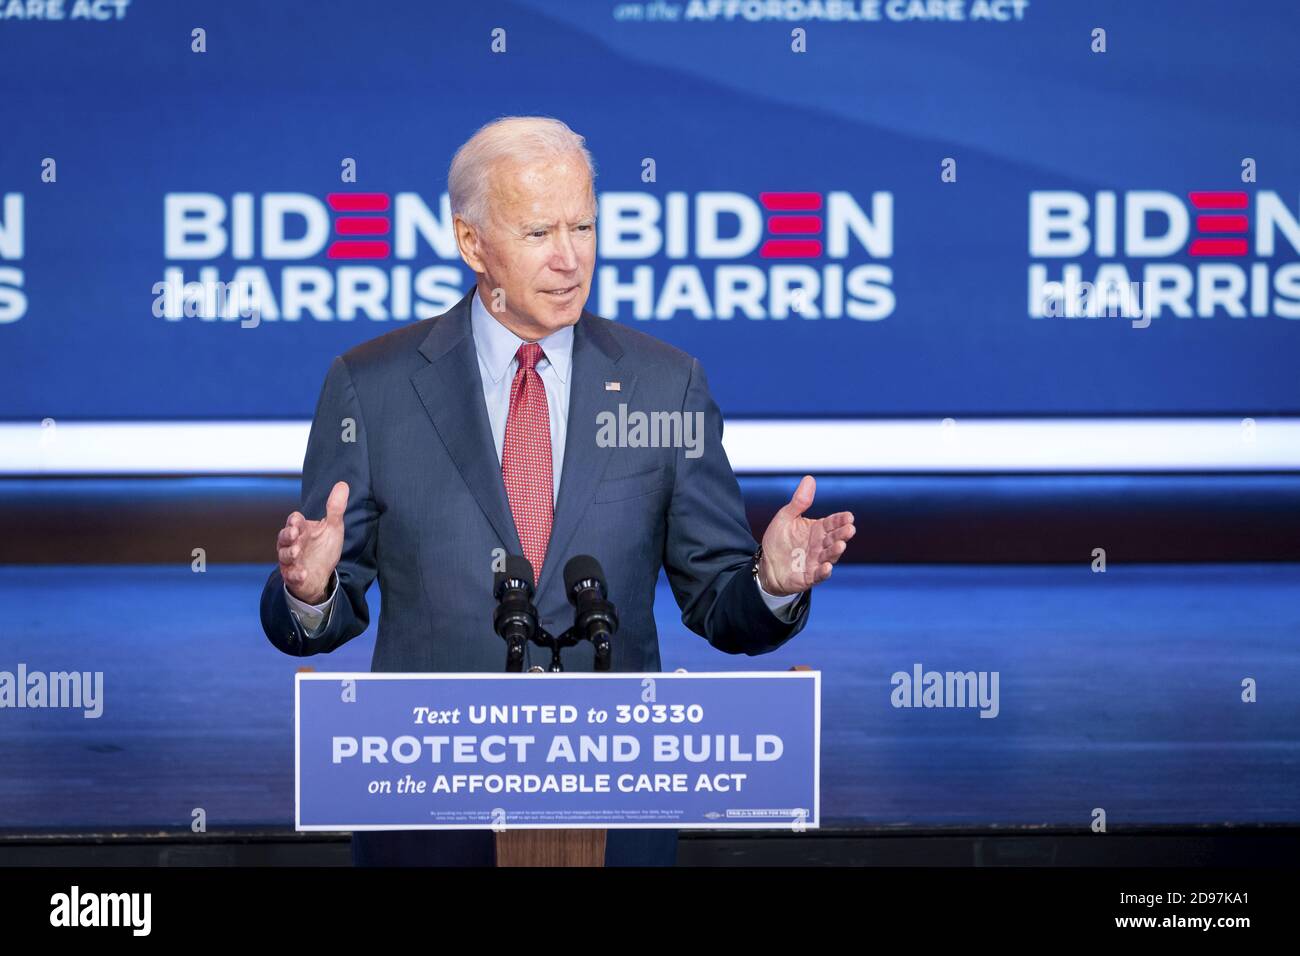 WILMINGTON, DELAWARE, USA - 28 October 2020 - US presidential Democratic candidate Joe Biden gives a speech on the Affordable Care Act in Wilmington, Stock Photo